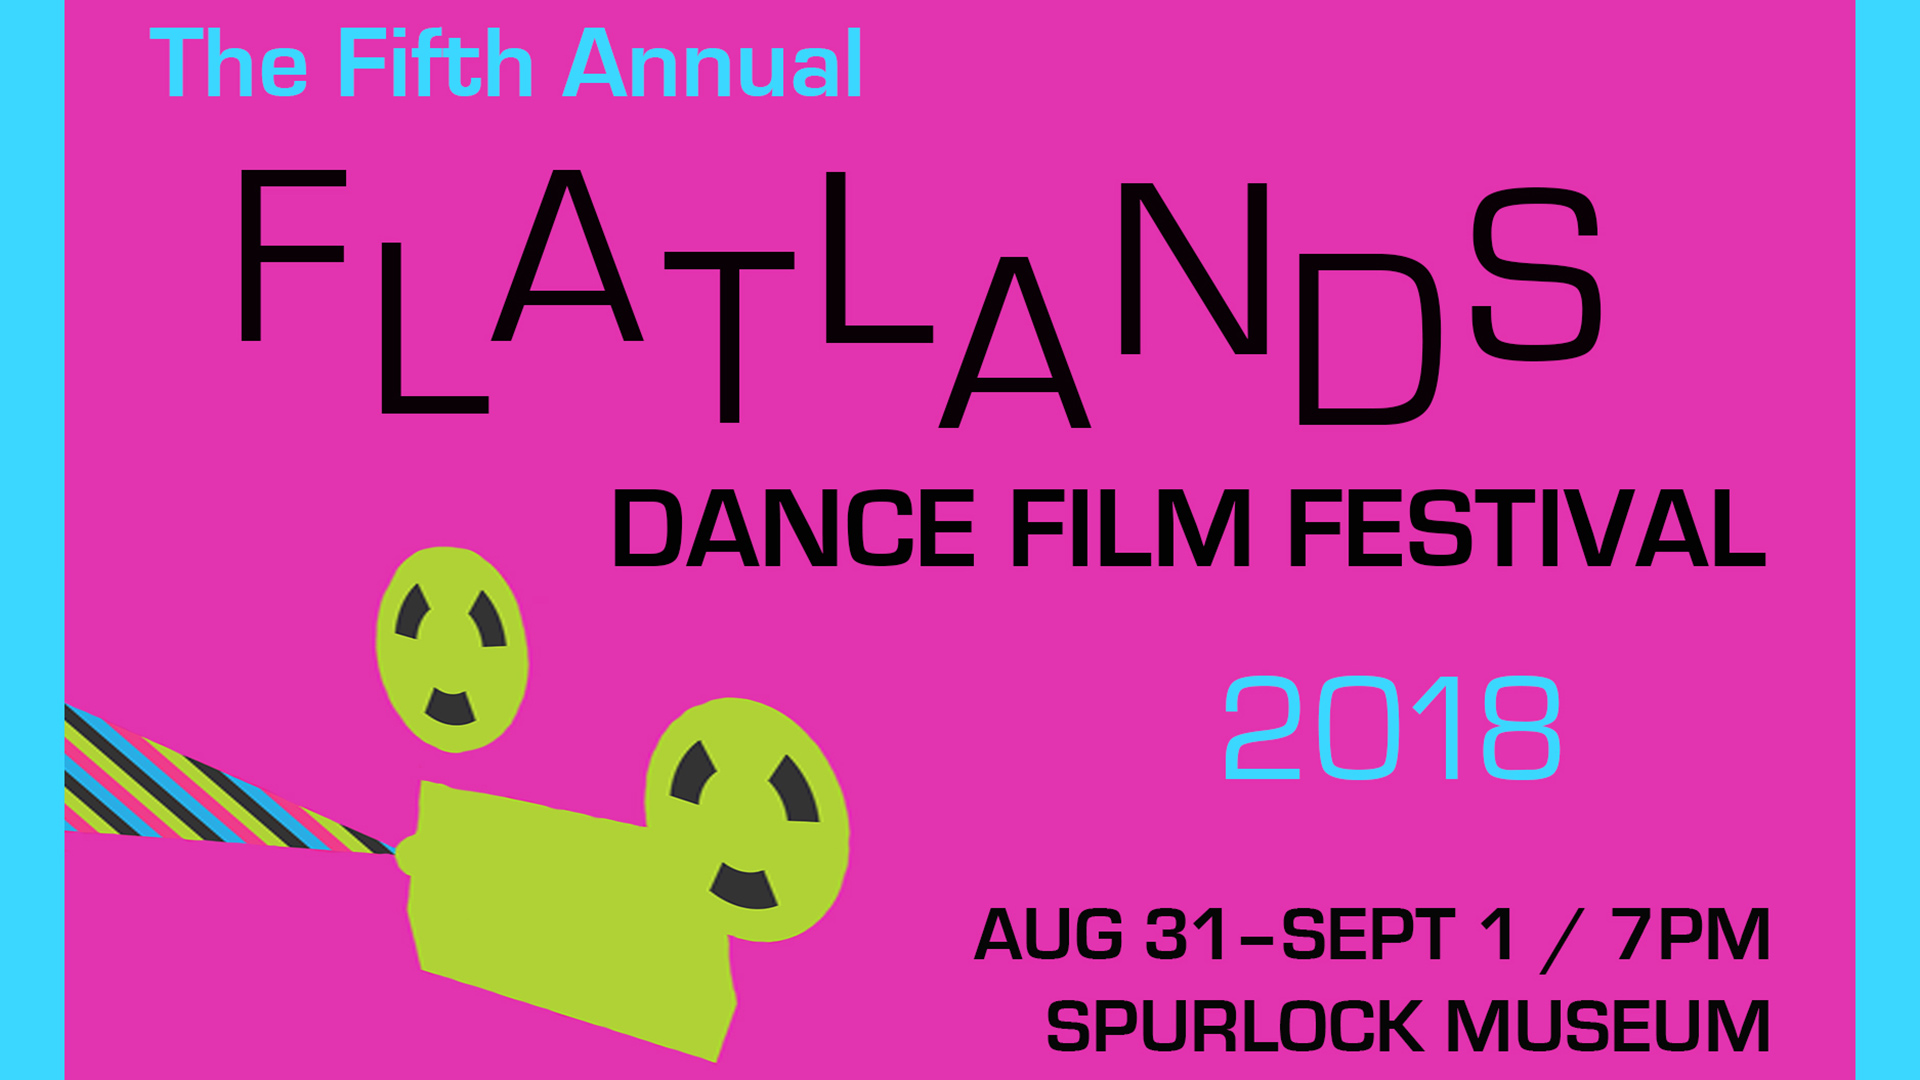 A bright-colored advertisement for the Flatlands Dance Film Festival featuring a neon-yellow cut out of a film projector.